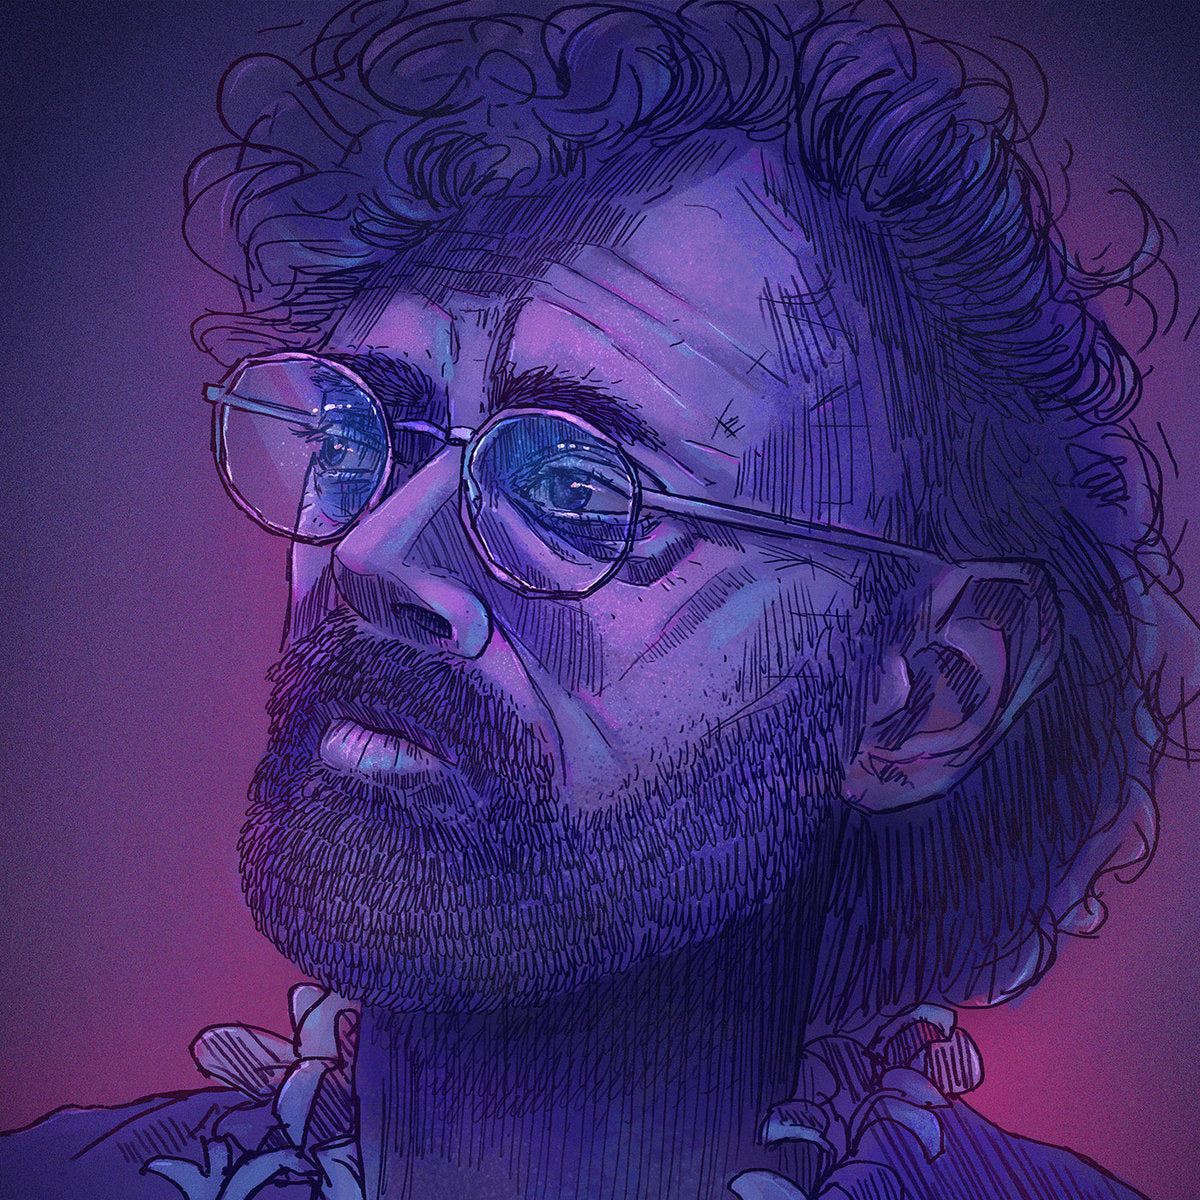 What is Going On? (ft. Terence McKenna)